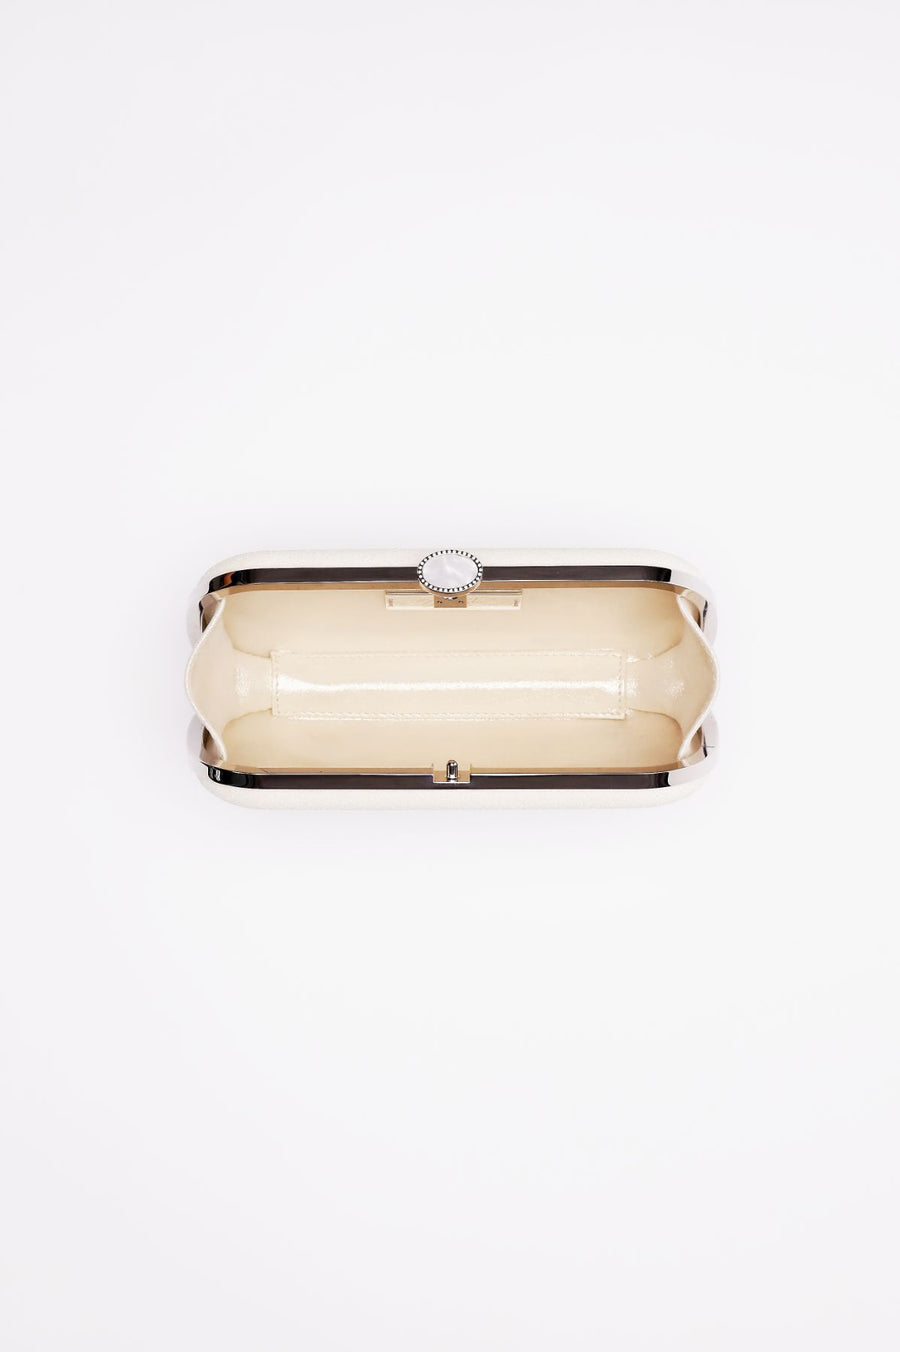 Bella Clutch in a shimmer white glitter body with a silver frame open showing aerial view inside the clutch.